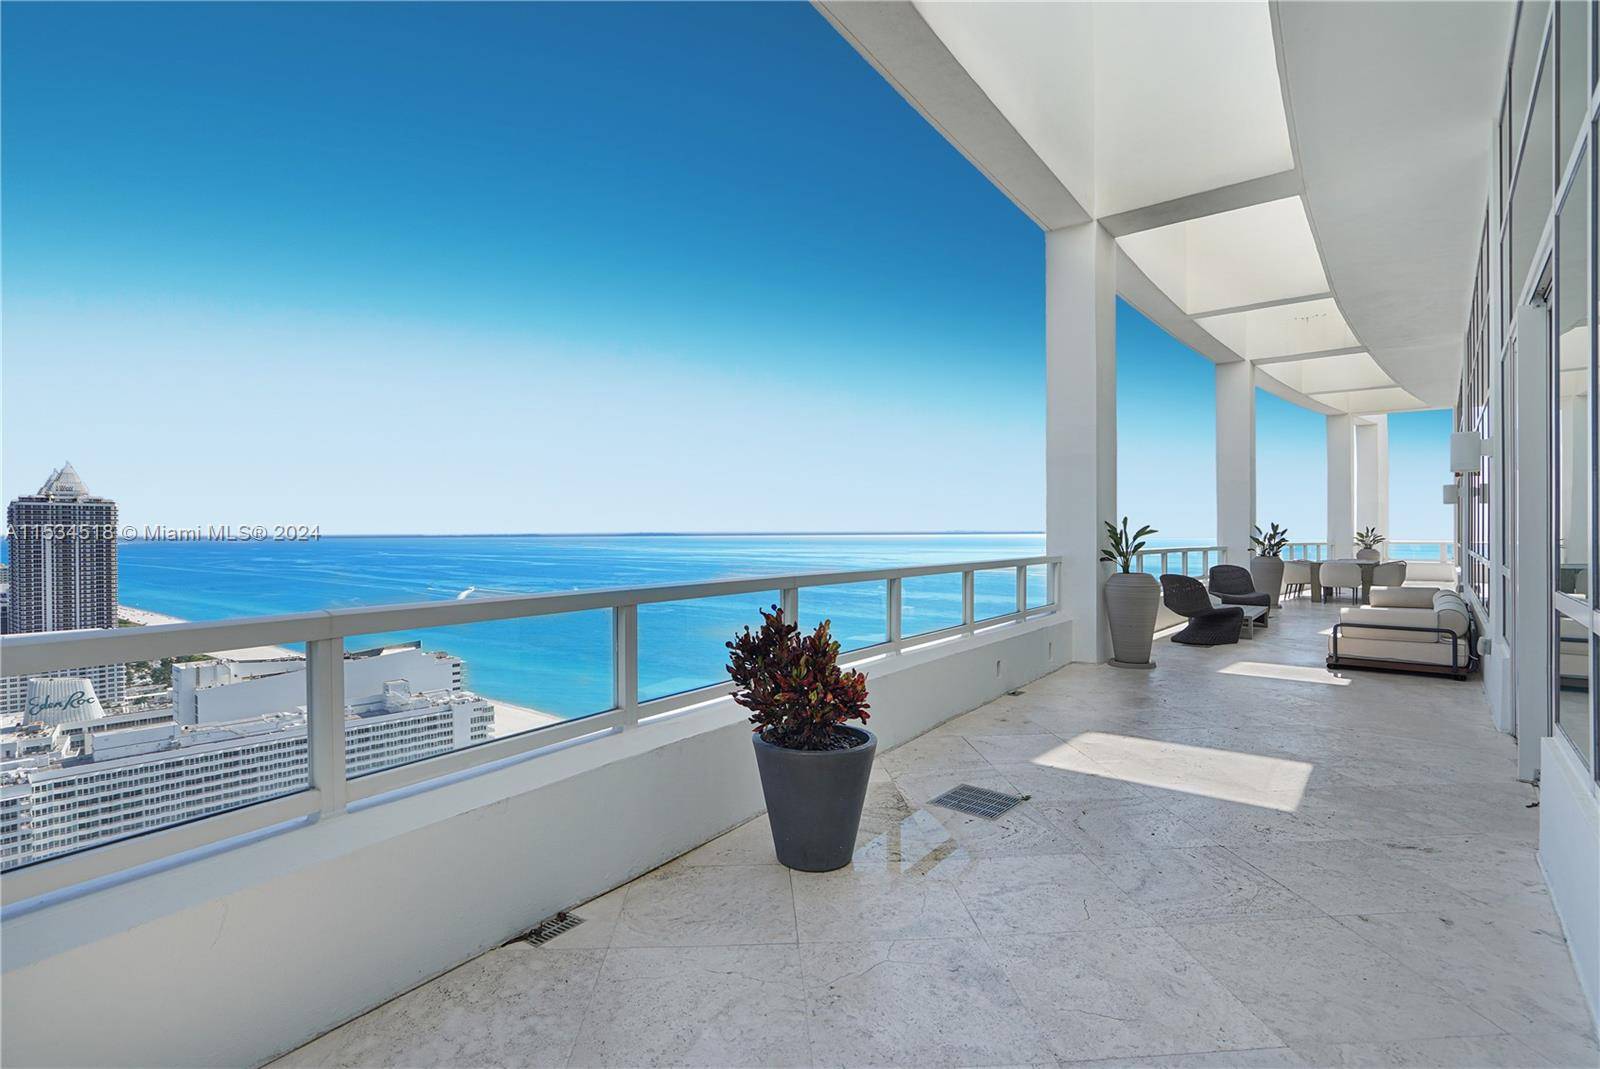 Enjoy the ultimate in resort style living with this spectacular, turnkey, 5BD 5BA 2 half bath penthouse encompassing the entire north side of the 37th floor at the iconic Fontainebleau ...